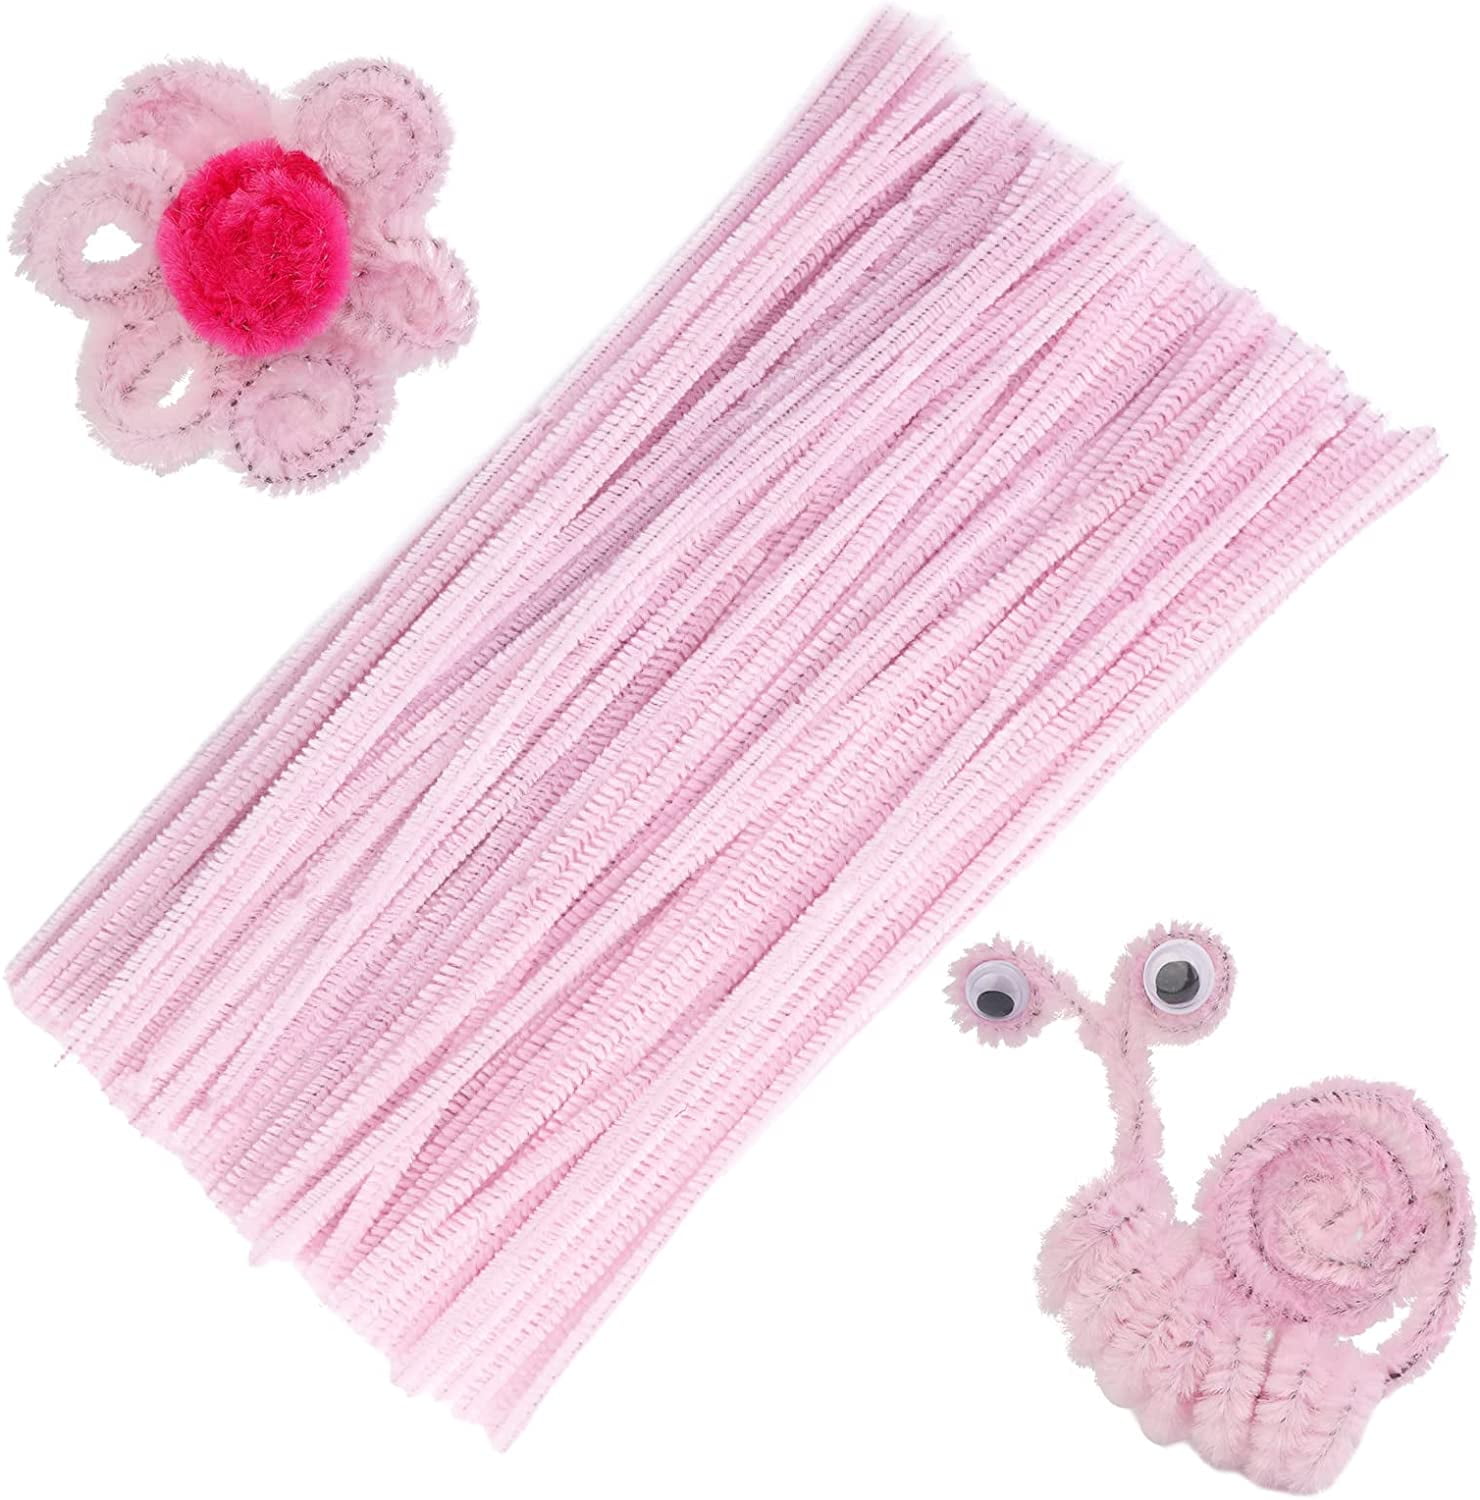 Carykon 100 Pcs Fuzzy Chenille Stems Pipe Cleaners For Arts And Crafts (Pink )